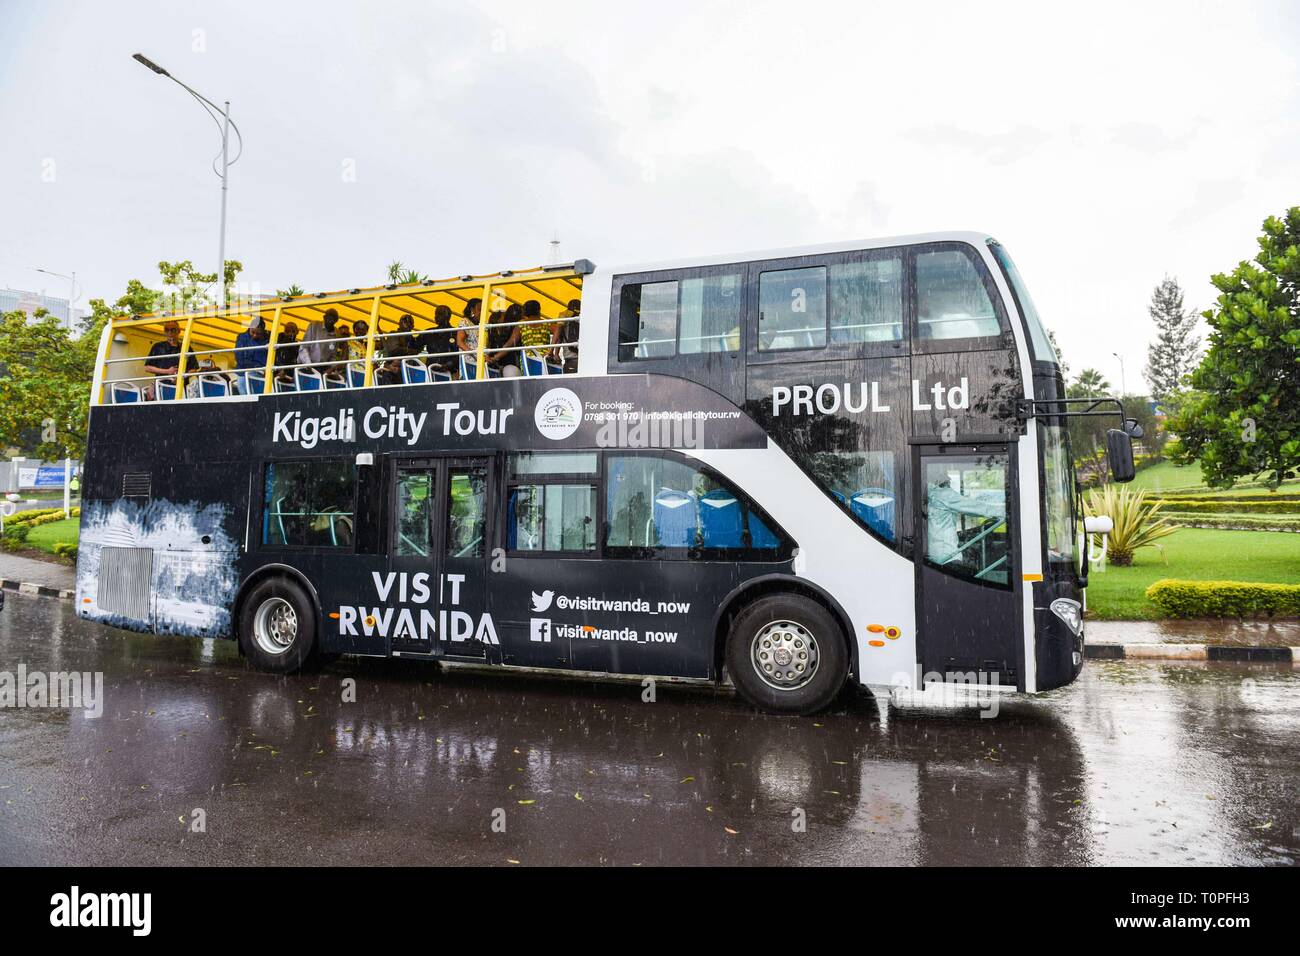 Kigali, Rwanda. 21st Mar, 2019. Kigali's first double-decker tour bus carries passengers in a city tour following its unveiling ceremony in Kigali, capital of Rwanda, on March 21, 2019. Rwanda Development Board in collaboration with Kigali City Tour Limited, a private company, on Thursday unveiled Kigali's first double-decker tour bus, which will be used for sightseeing in the city. Credit: Cyril Ndegeya/Xinhua/Alamy Live News Stock Photo